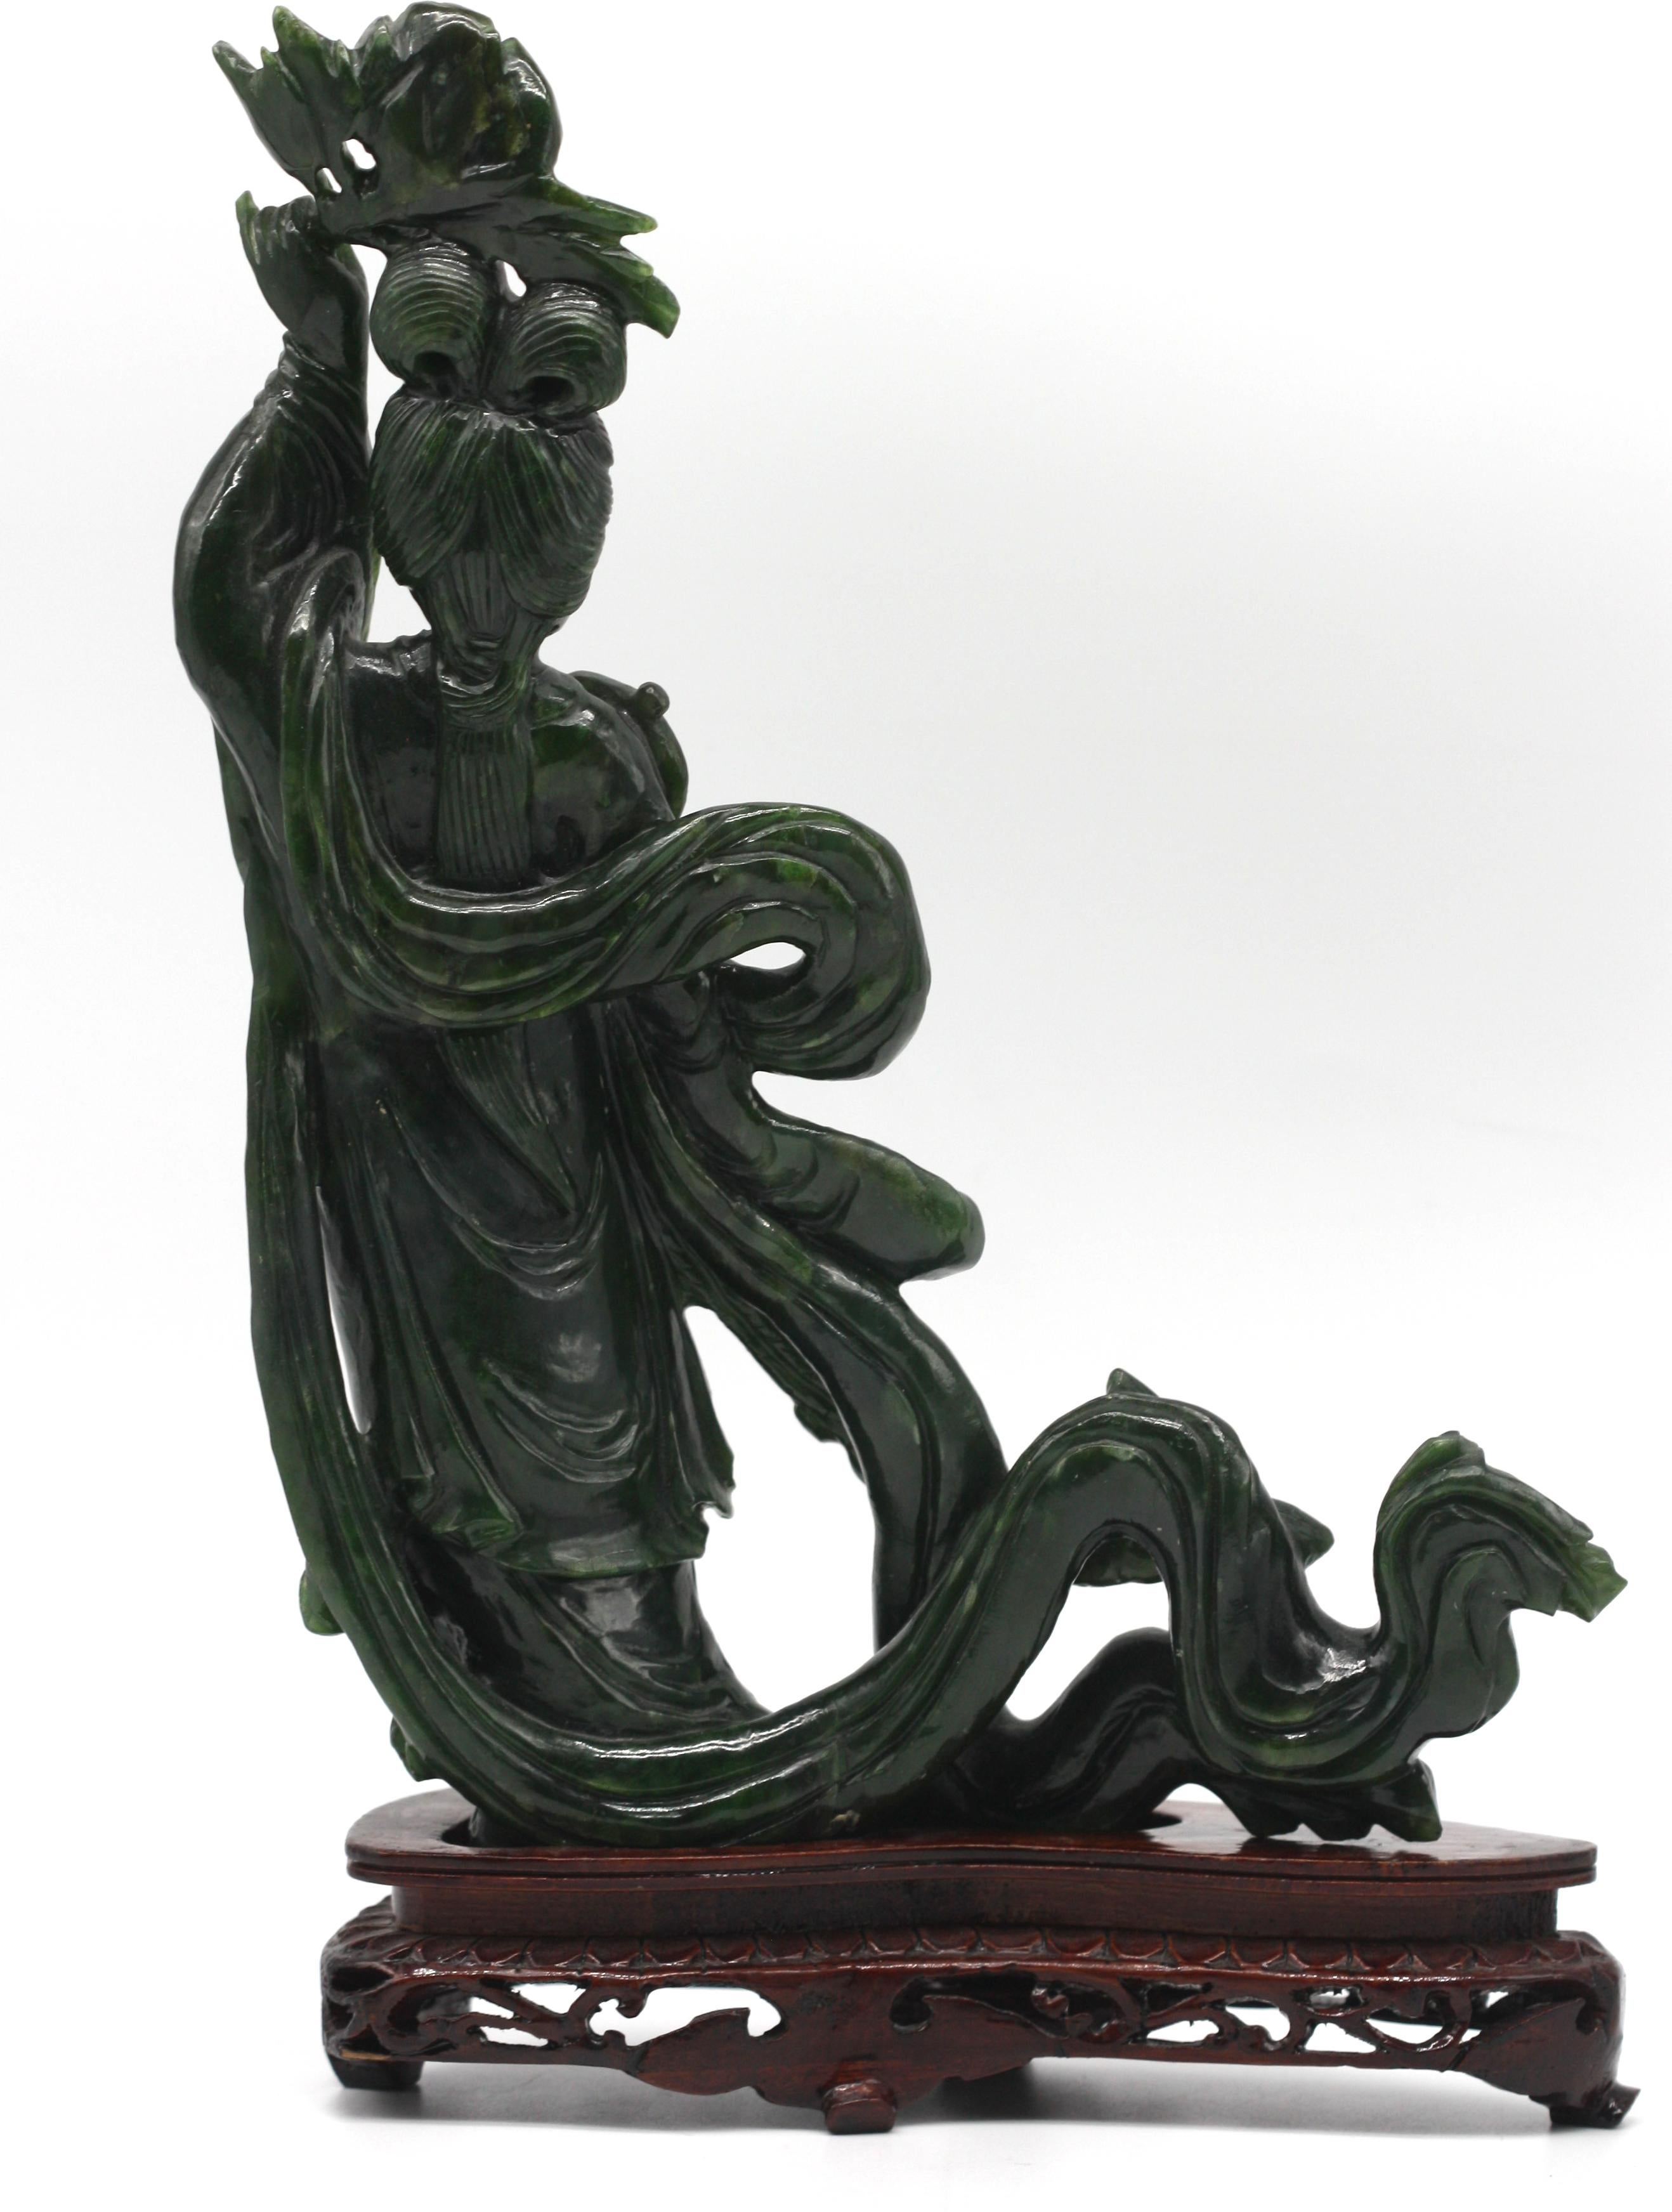 
Chinese Spinach Green Jade Figure of a Beauty
The lady in elegant attire with a flowing robe, her left-hand holds a floral blossom, in her right a fan, on a wood stand.
. Height 11 in., Width 8 in., Depth 1.75 in.